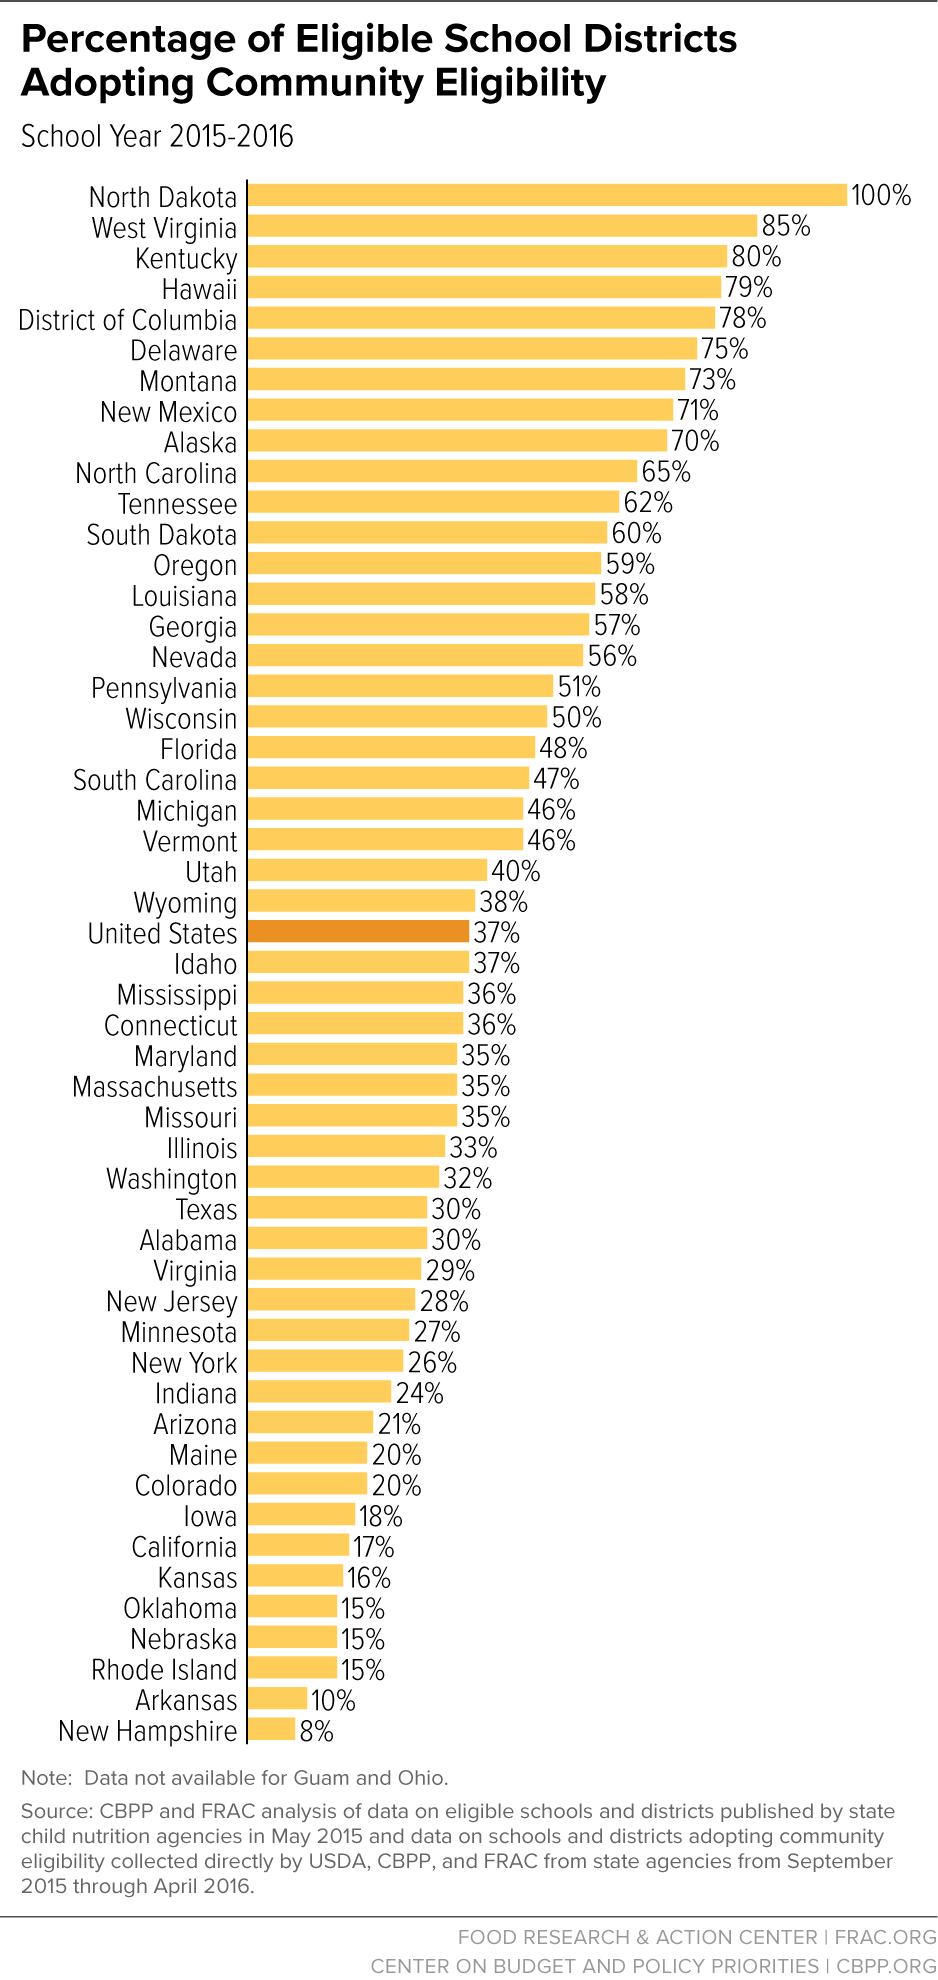 Percentage of Eligible School Districts Adopting Community Eligibility